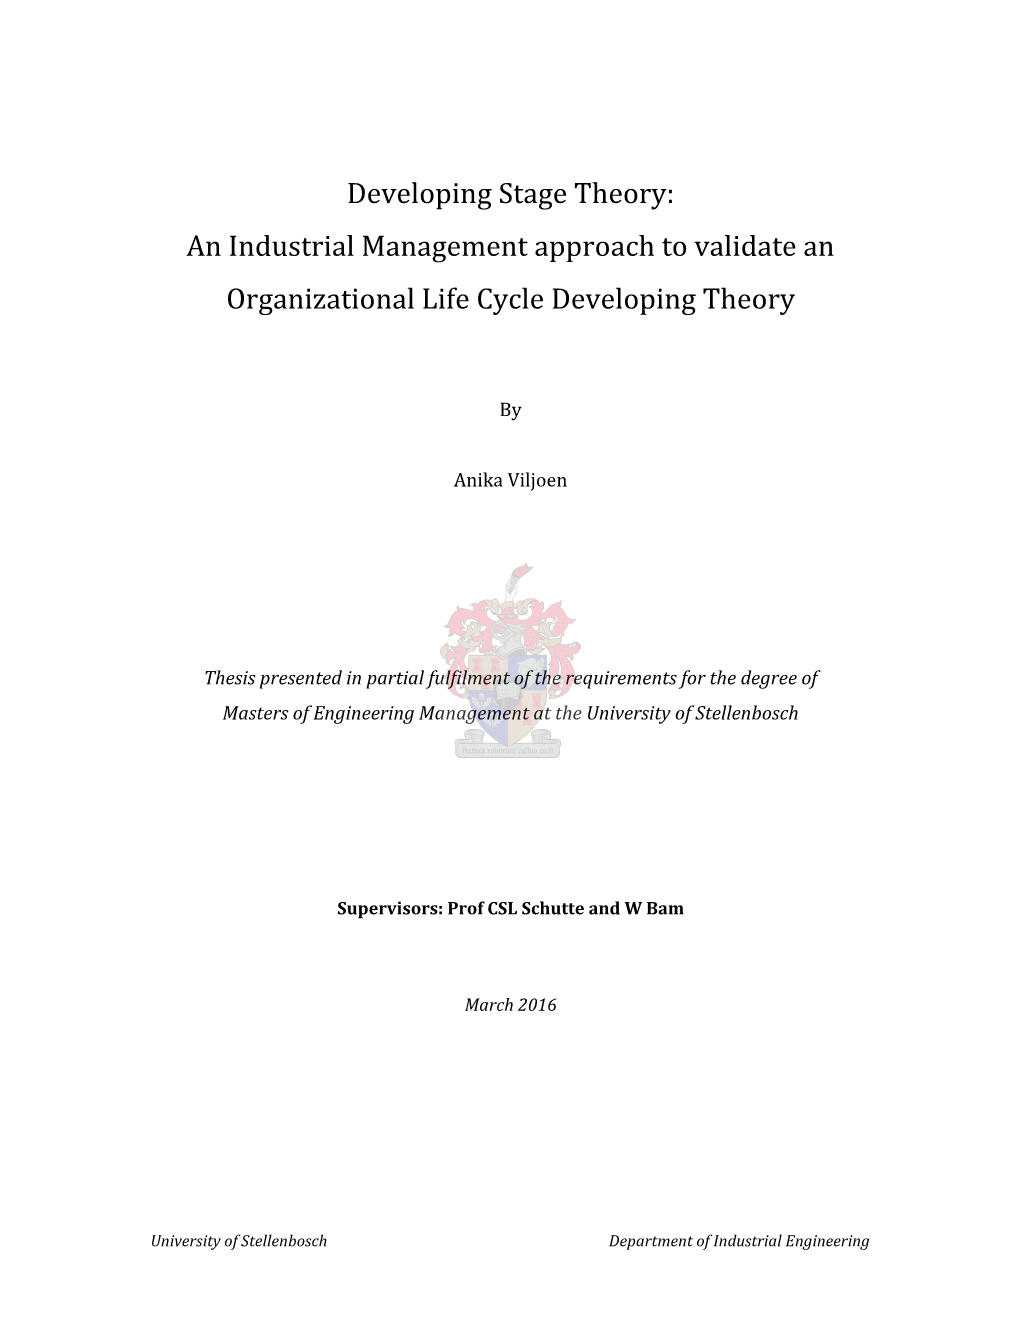 Developing Stage Theory: an Industrial Management Approach to Validate an Organizational Life Cycle Developmen